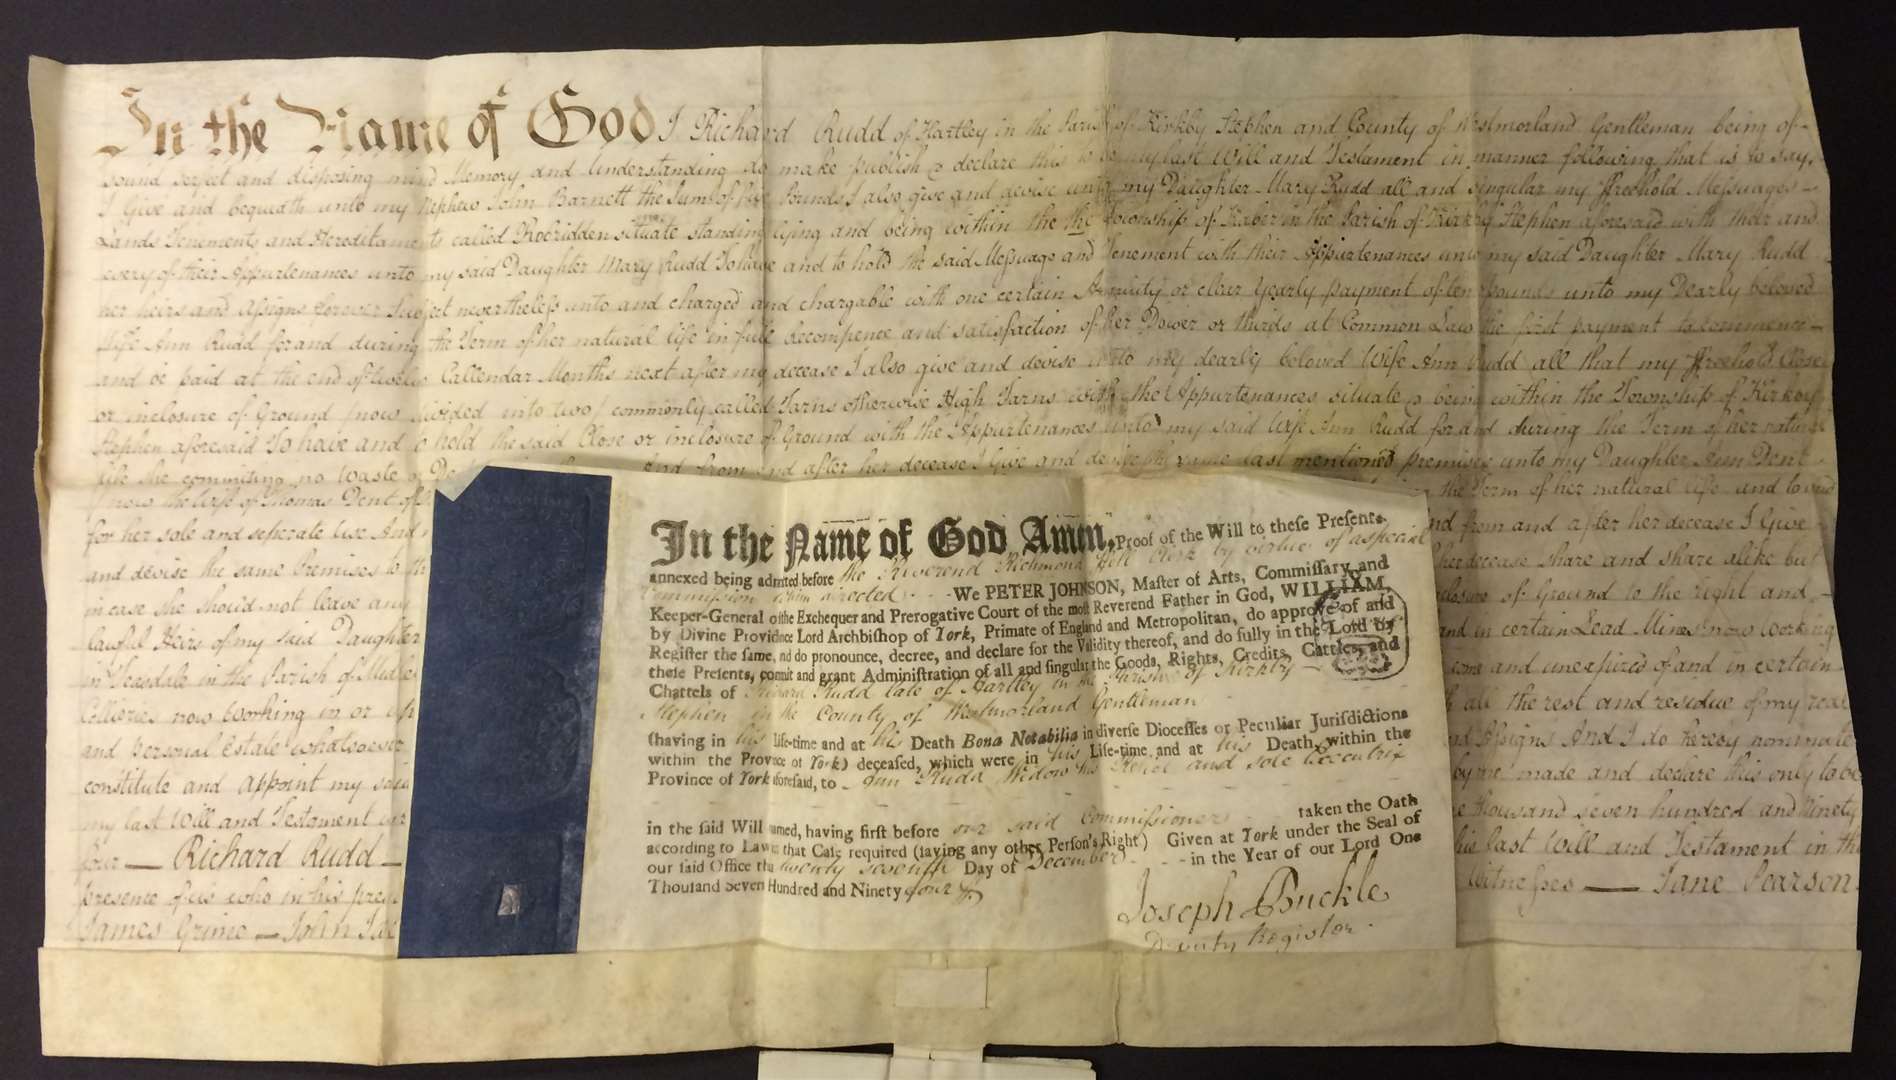 Documents like this one dating back hundreds of years are on show at Thomson Snell & Passmore but also the local museum in Tunbridge Wells.